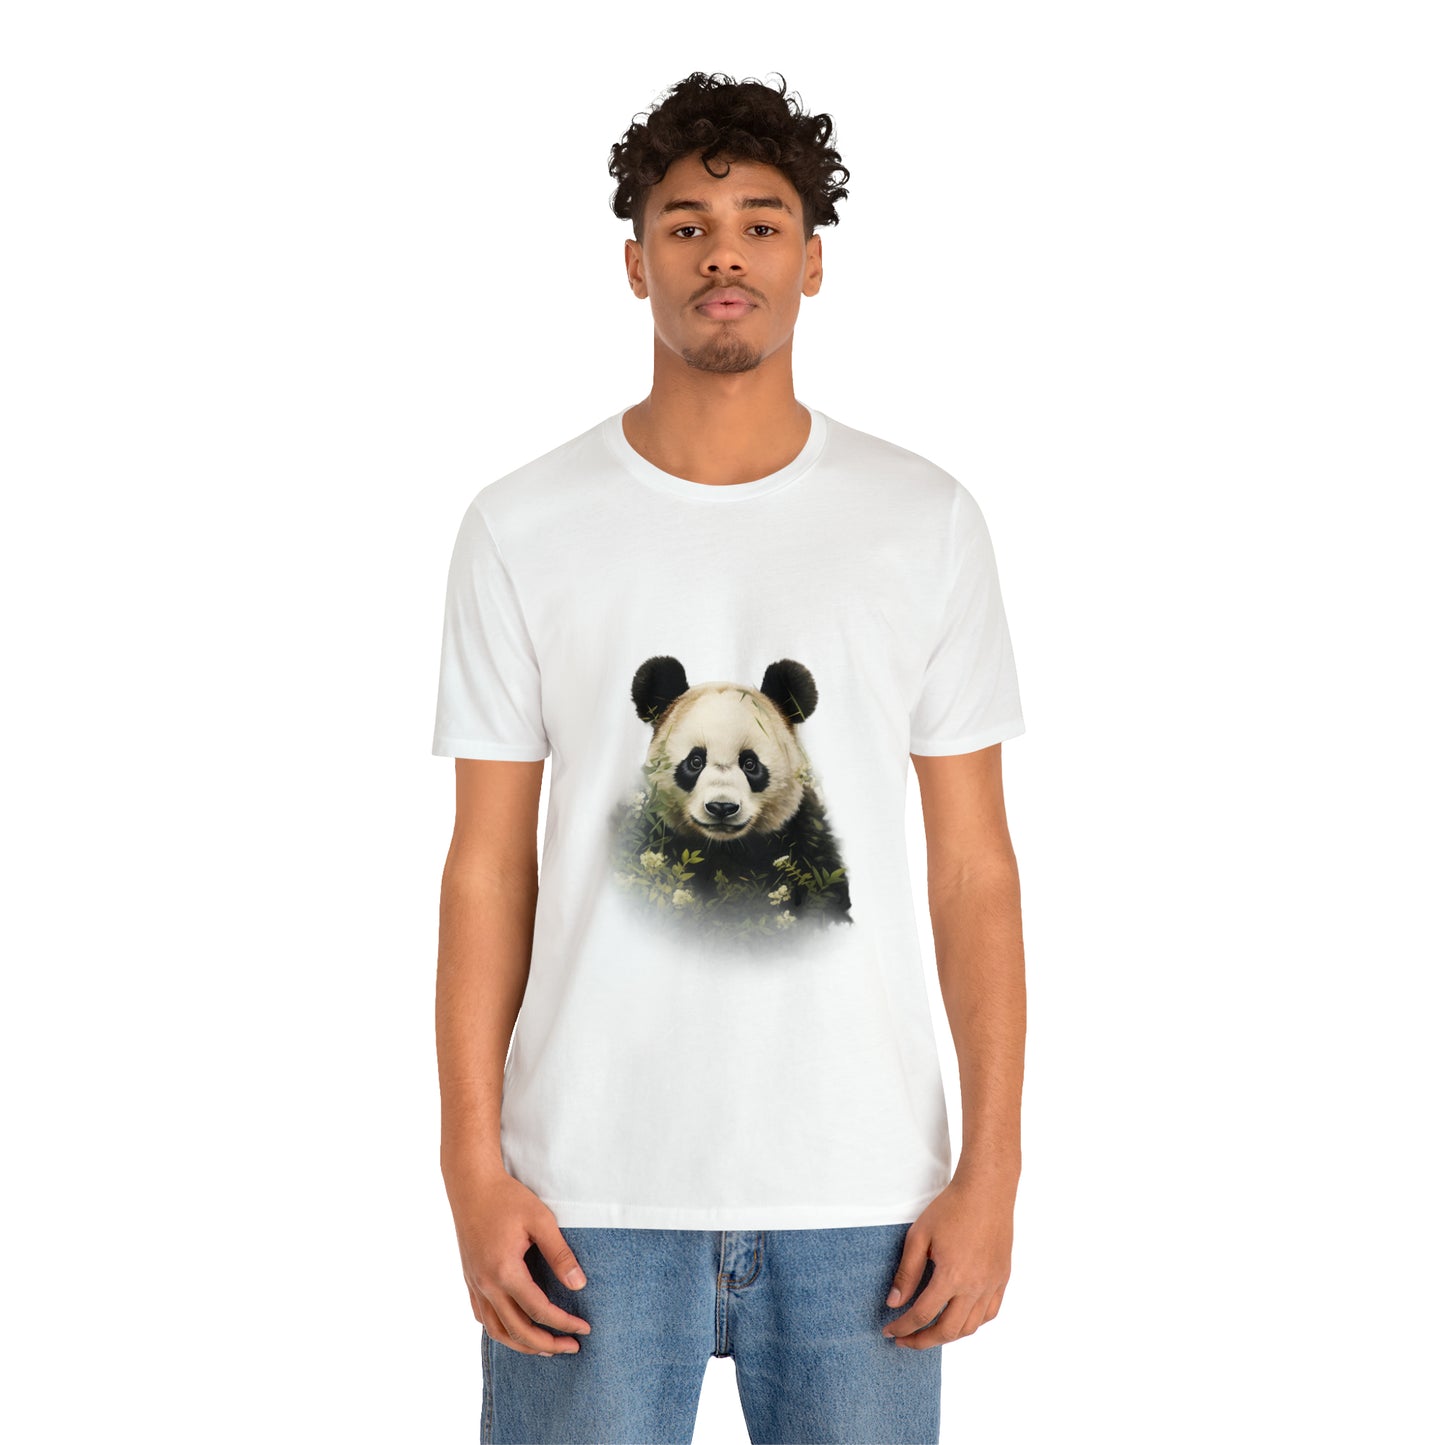 Panda Print Tee with Artistic Touch